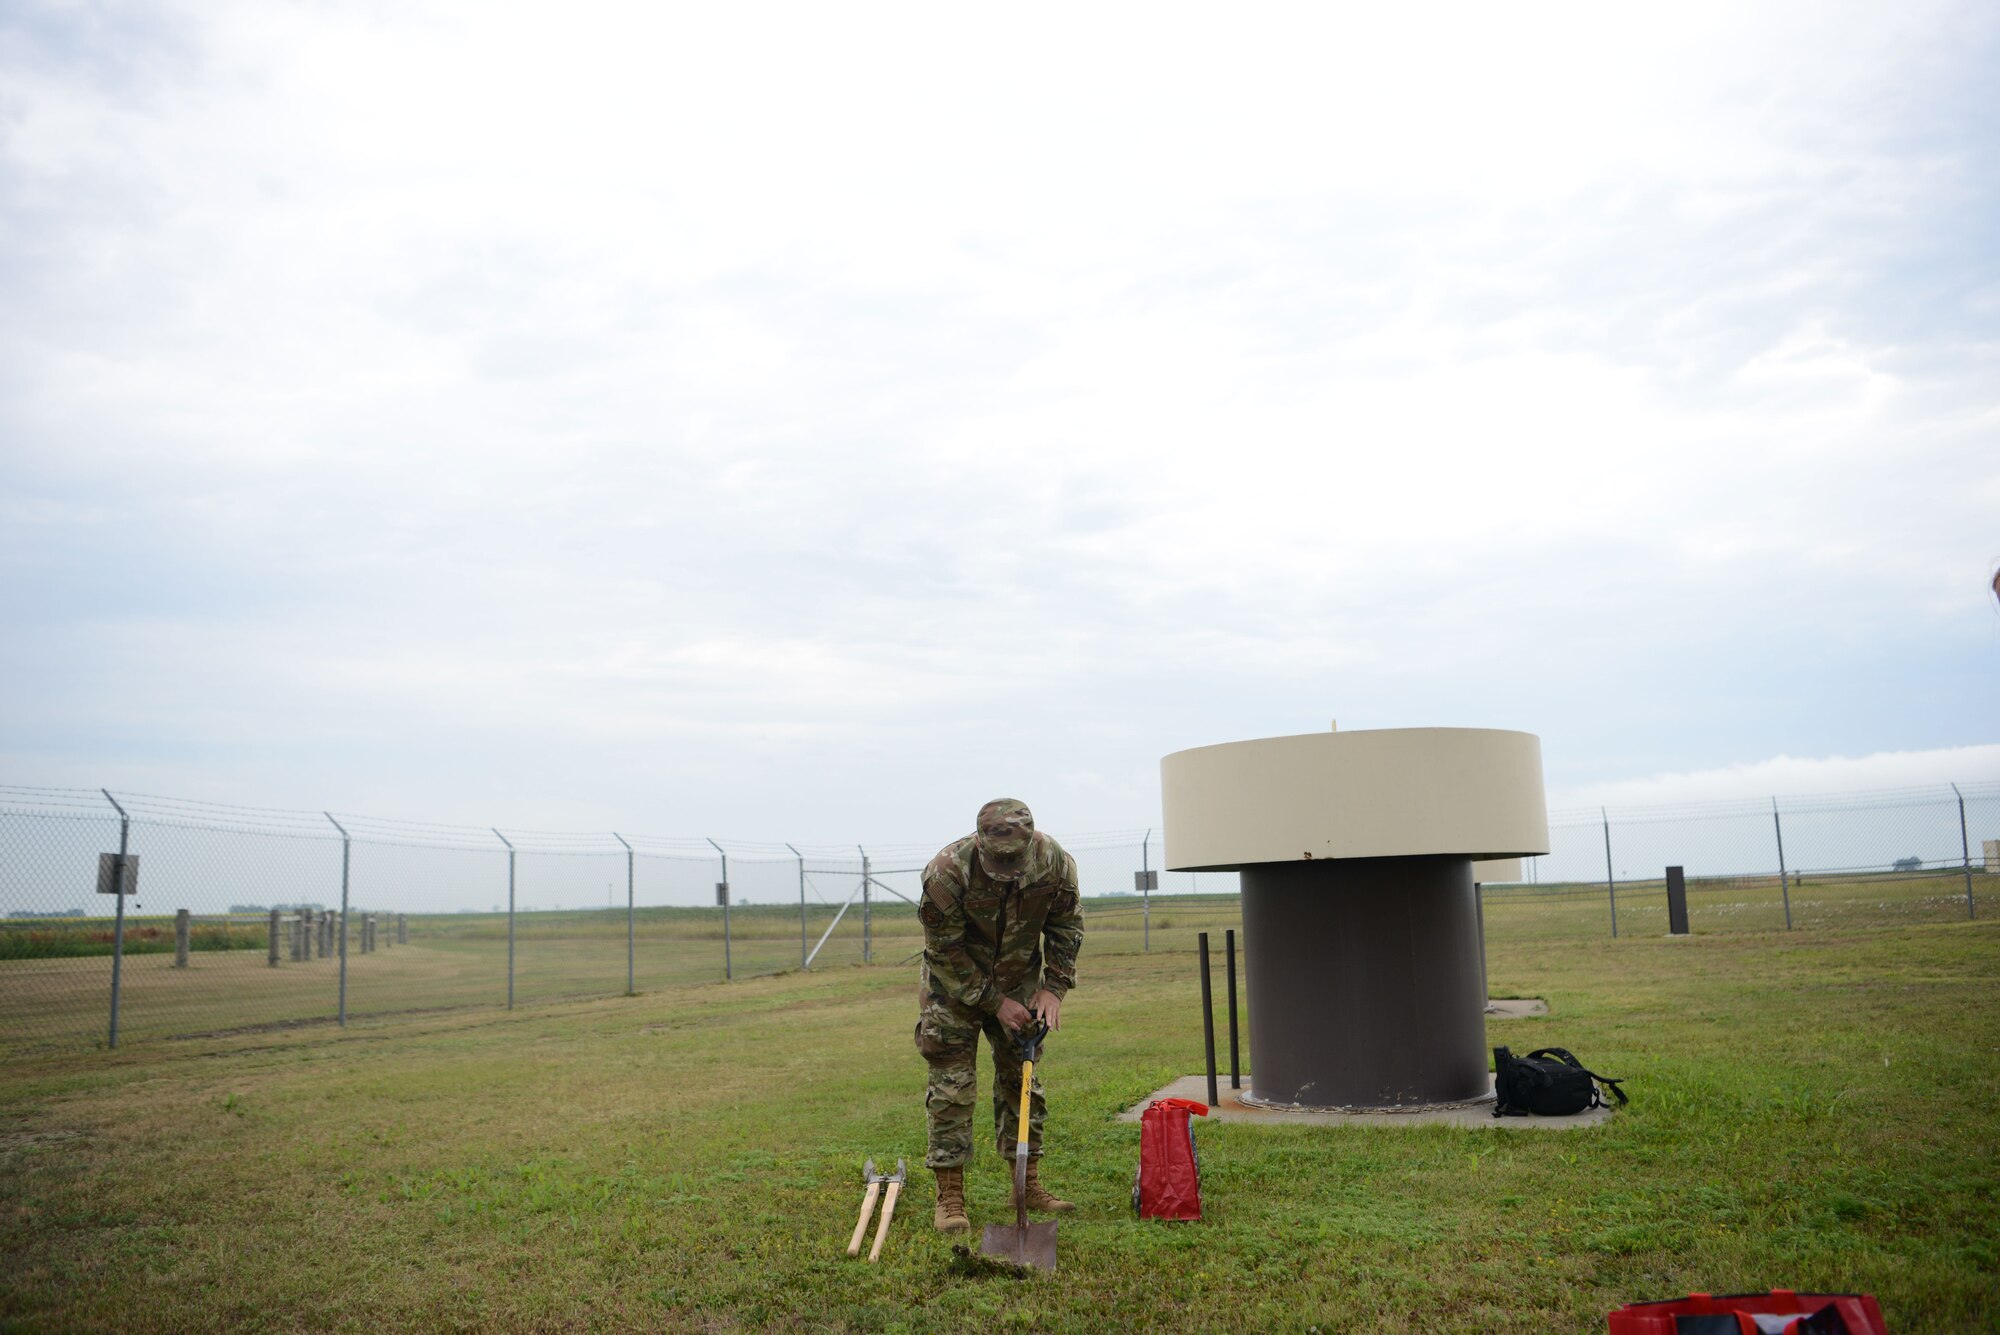 U.S. Air Force Staff Sgt. Oscar Ruiz-Camacho, 5th Operational Medical Readiness Squadron, Bioenvironmental Engineering Technician, digs a hole outside of a missile alert facility (MAF), near Minot Air Force Base, North Dakota, July 25, 2023. Ruiz-Camacho collected a soil sample at a MAF to test for organic phosphates from pesticides. Airmen from the 5th OMRS and the United States Air Force School of Aerospace Medicine visited Minot’s MAFs as part of the ongoing “Missile Community Cancer Study” at all three intercontinental ballistic missile wings in Air Force Global Strike Command. The team assessed indoor air quality at each facility to include temperature, humidity, carbon dioxide and carbon monoxide levels. They also collected water and soil samples and tested for presence of radon, polychlorinated biphenyls, organic phosphates and other potential occupational exposure hazards. USAFSAM is part of the Air Force Research Laboratory’s 711th Human Performance Wing.